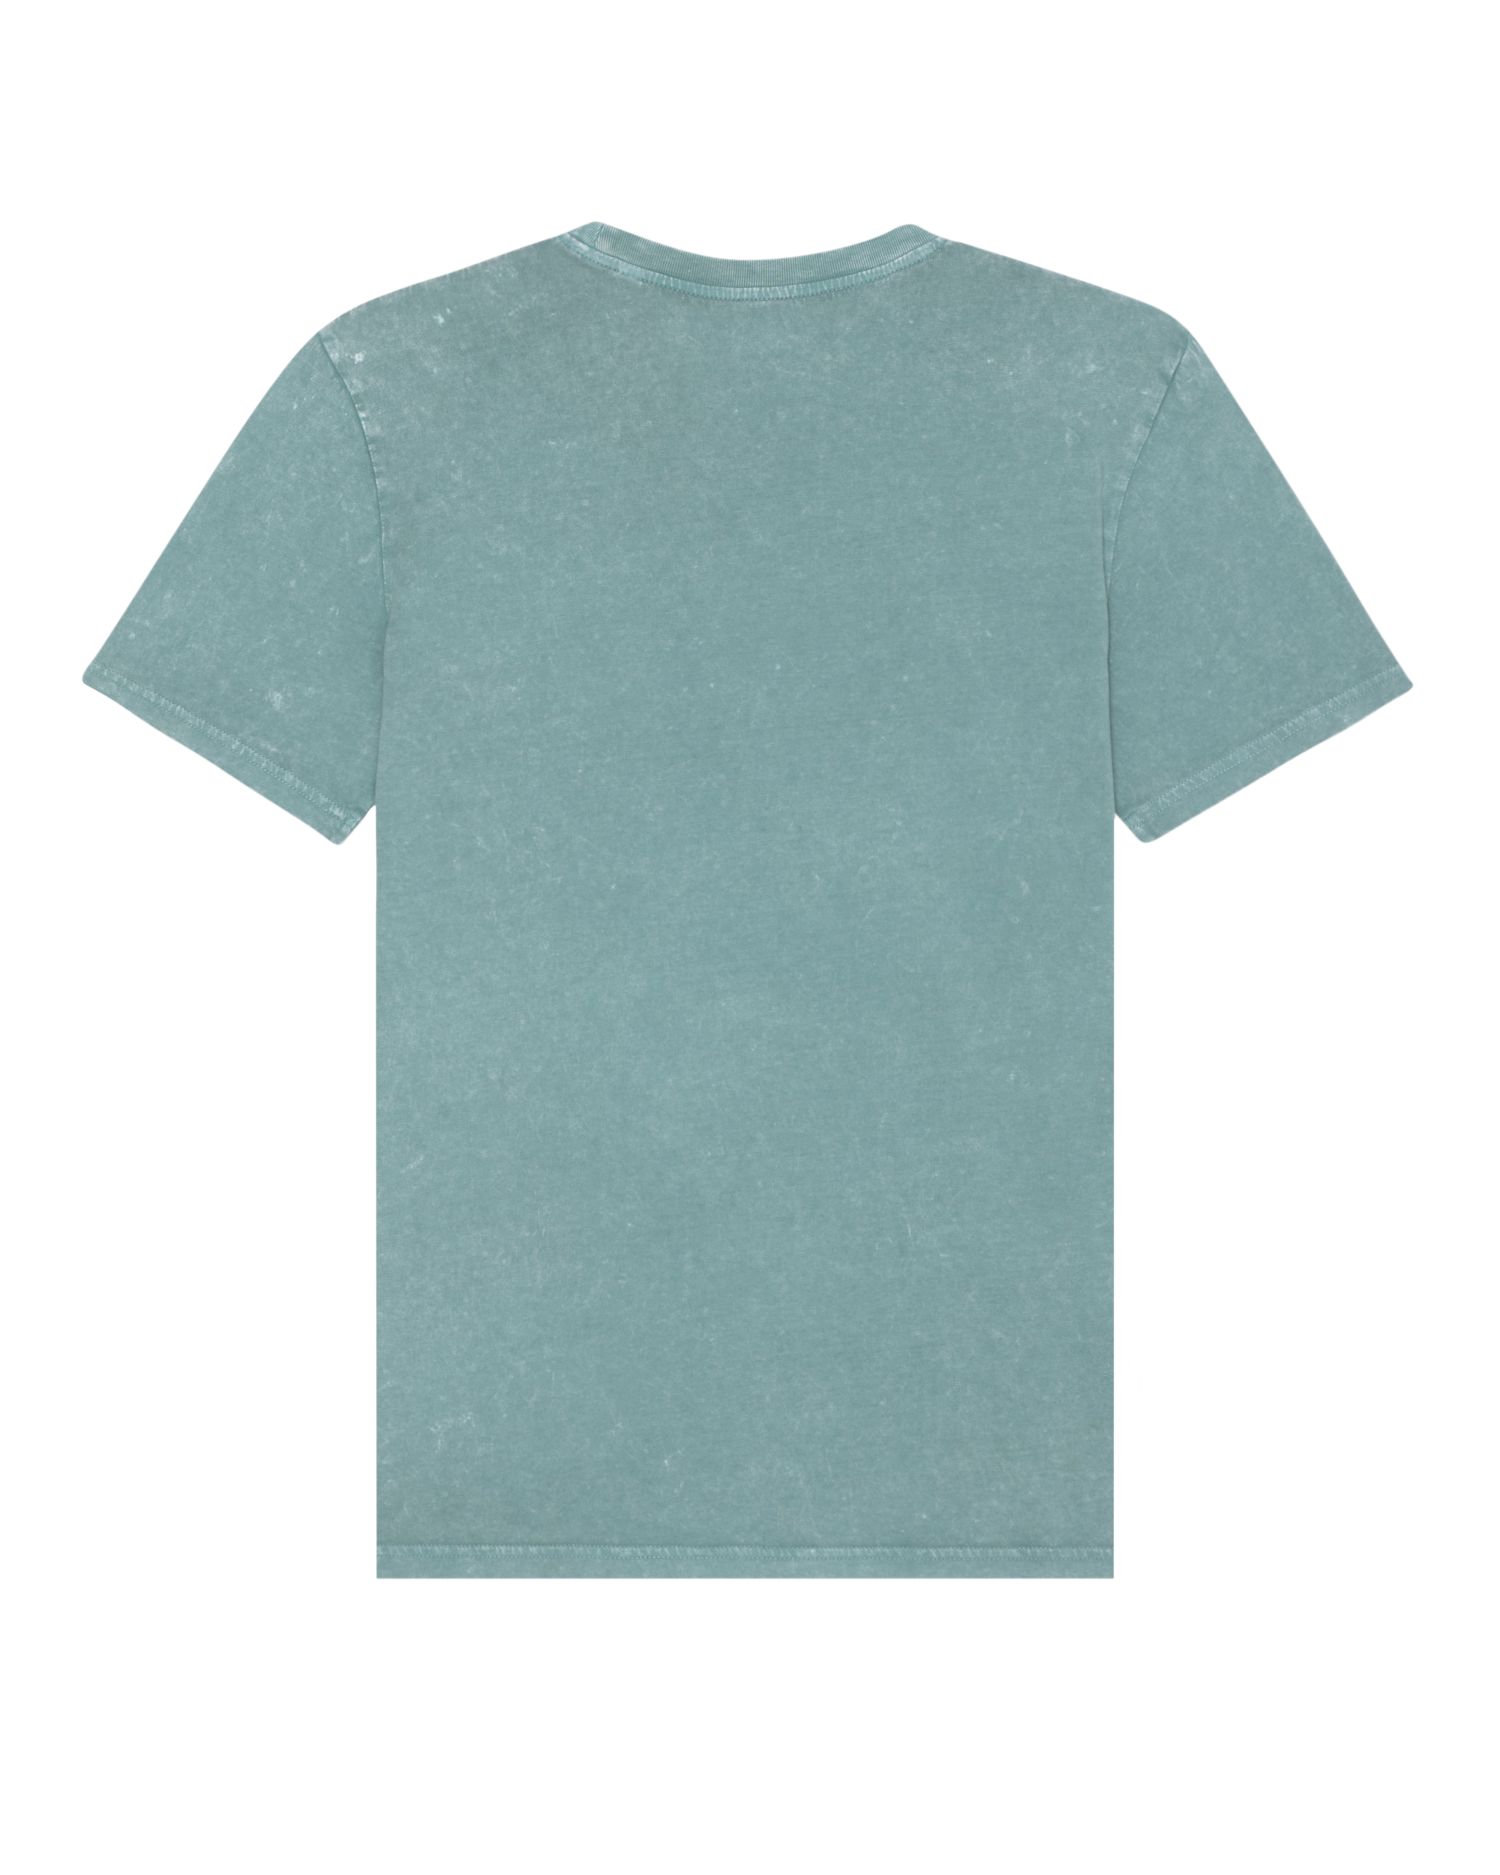 T-Shirt Creator Vintage in Farbe G. Dyed Aged Teal Monstera